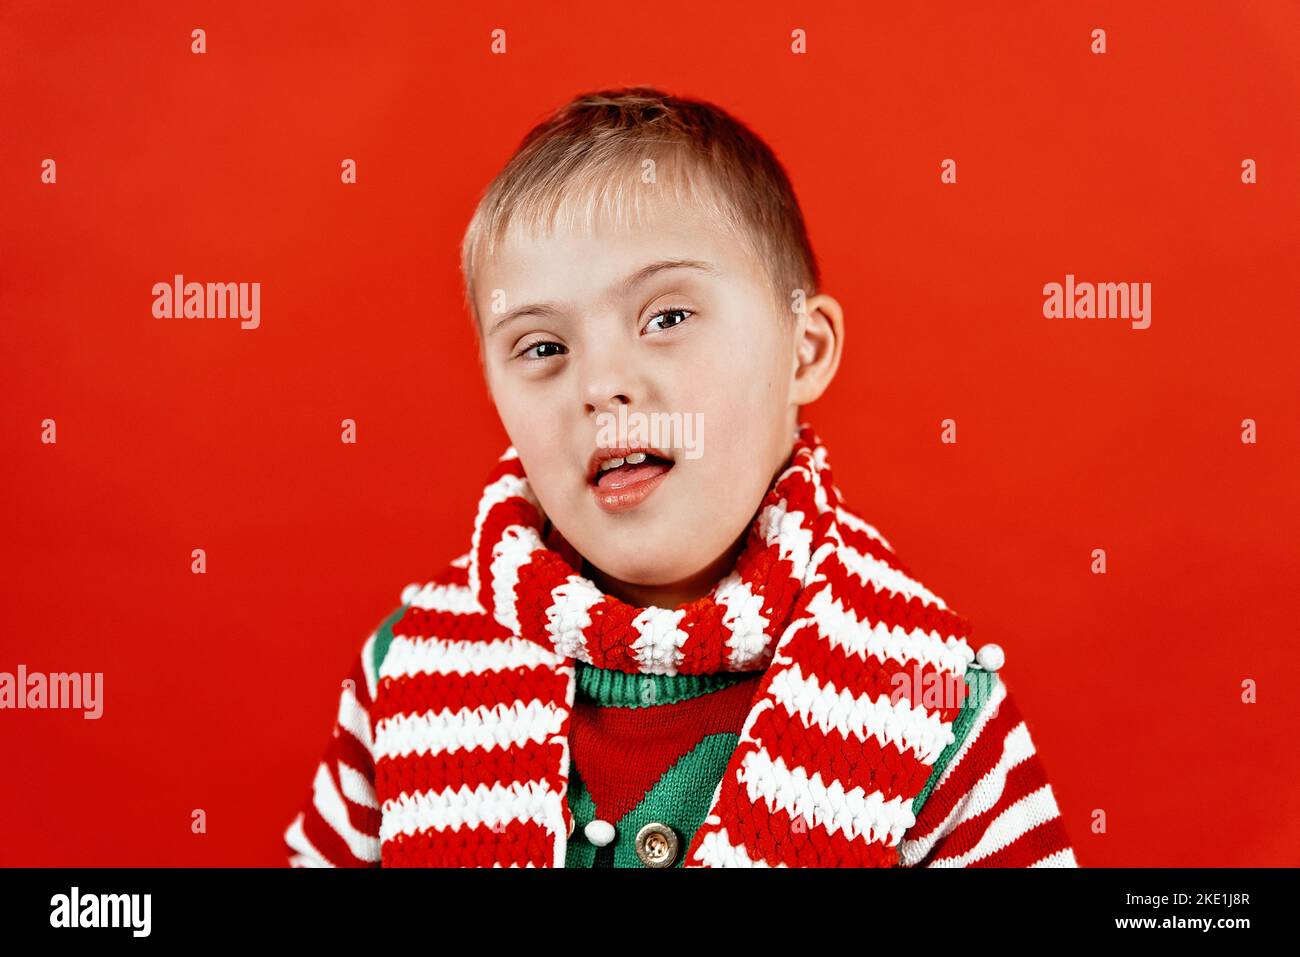 Happy child with Down syndrome in Christmas scarf having fun and laughing in studio. Christmas mood. happy new year. Portrait on red background Stock Photo